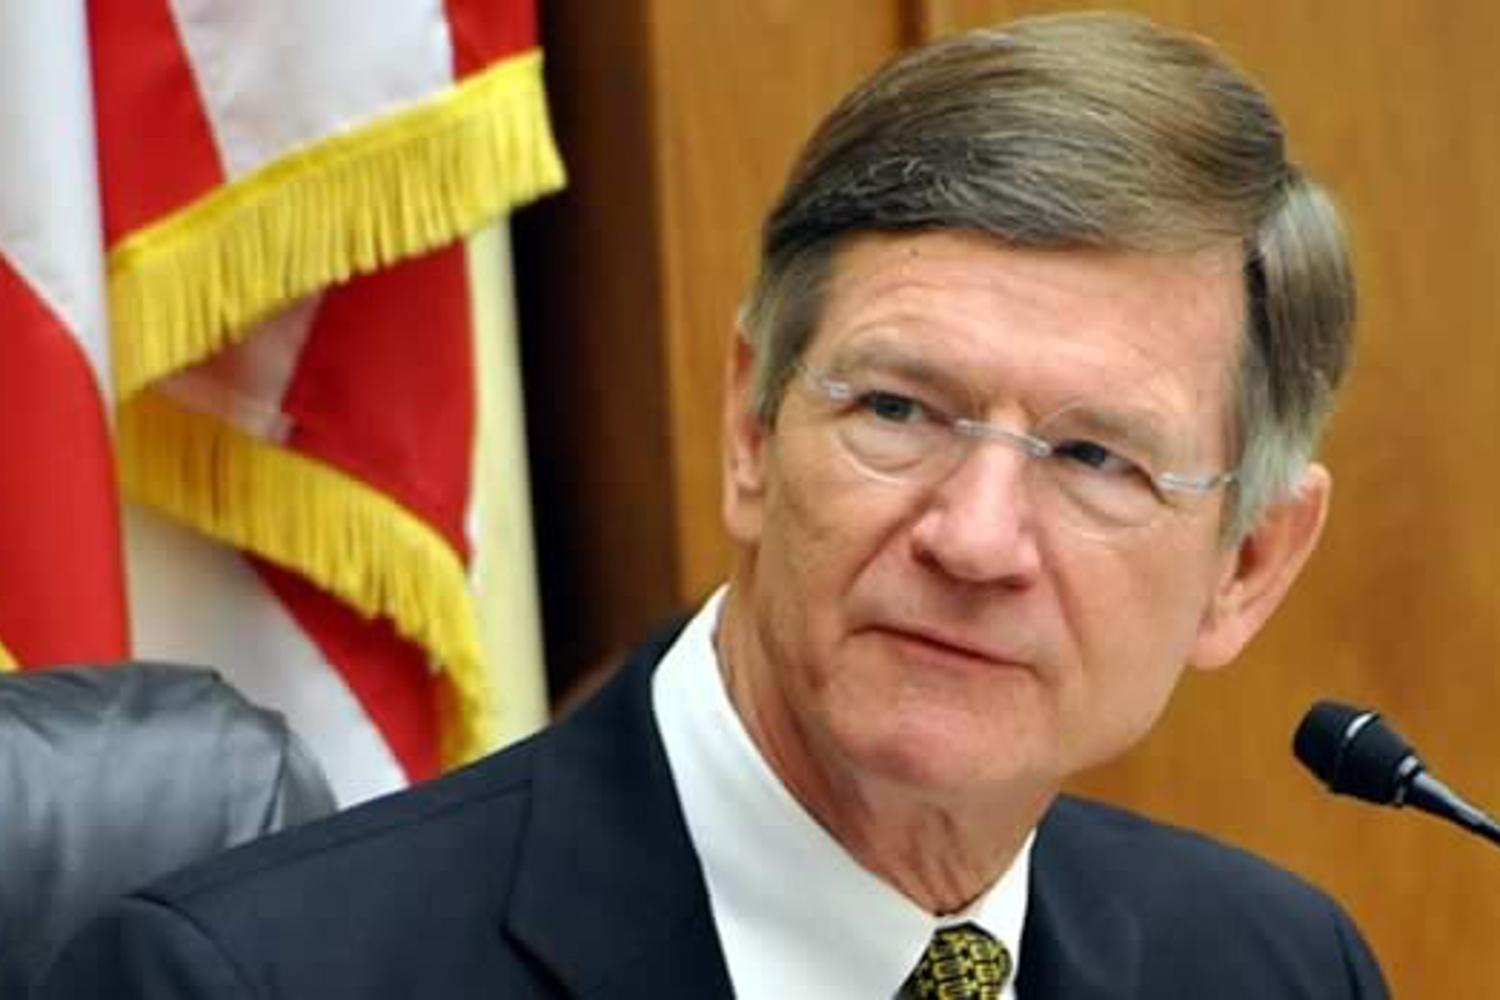 Representative Lamar Smith, R-Texas, is Chairman of the Science Committee and sponsor for the Secret Science Reform Act.